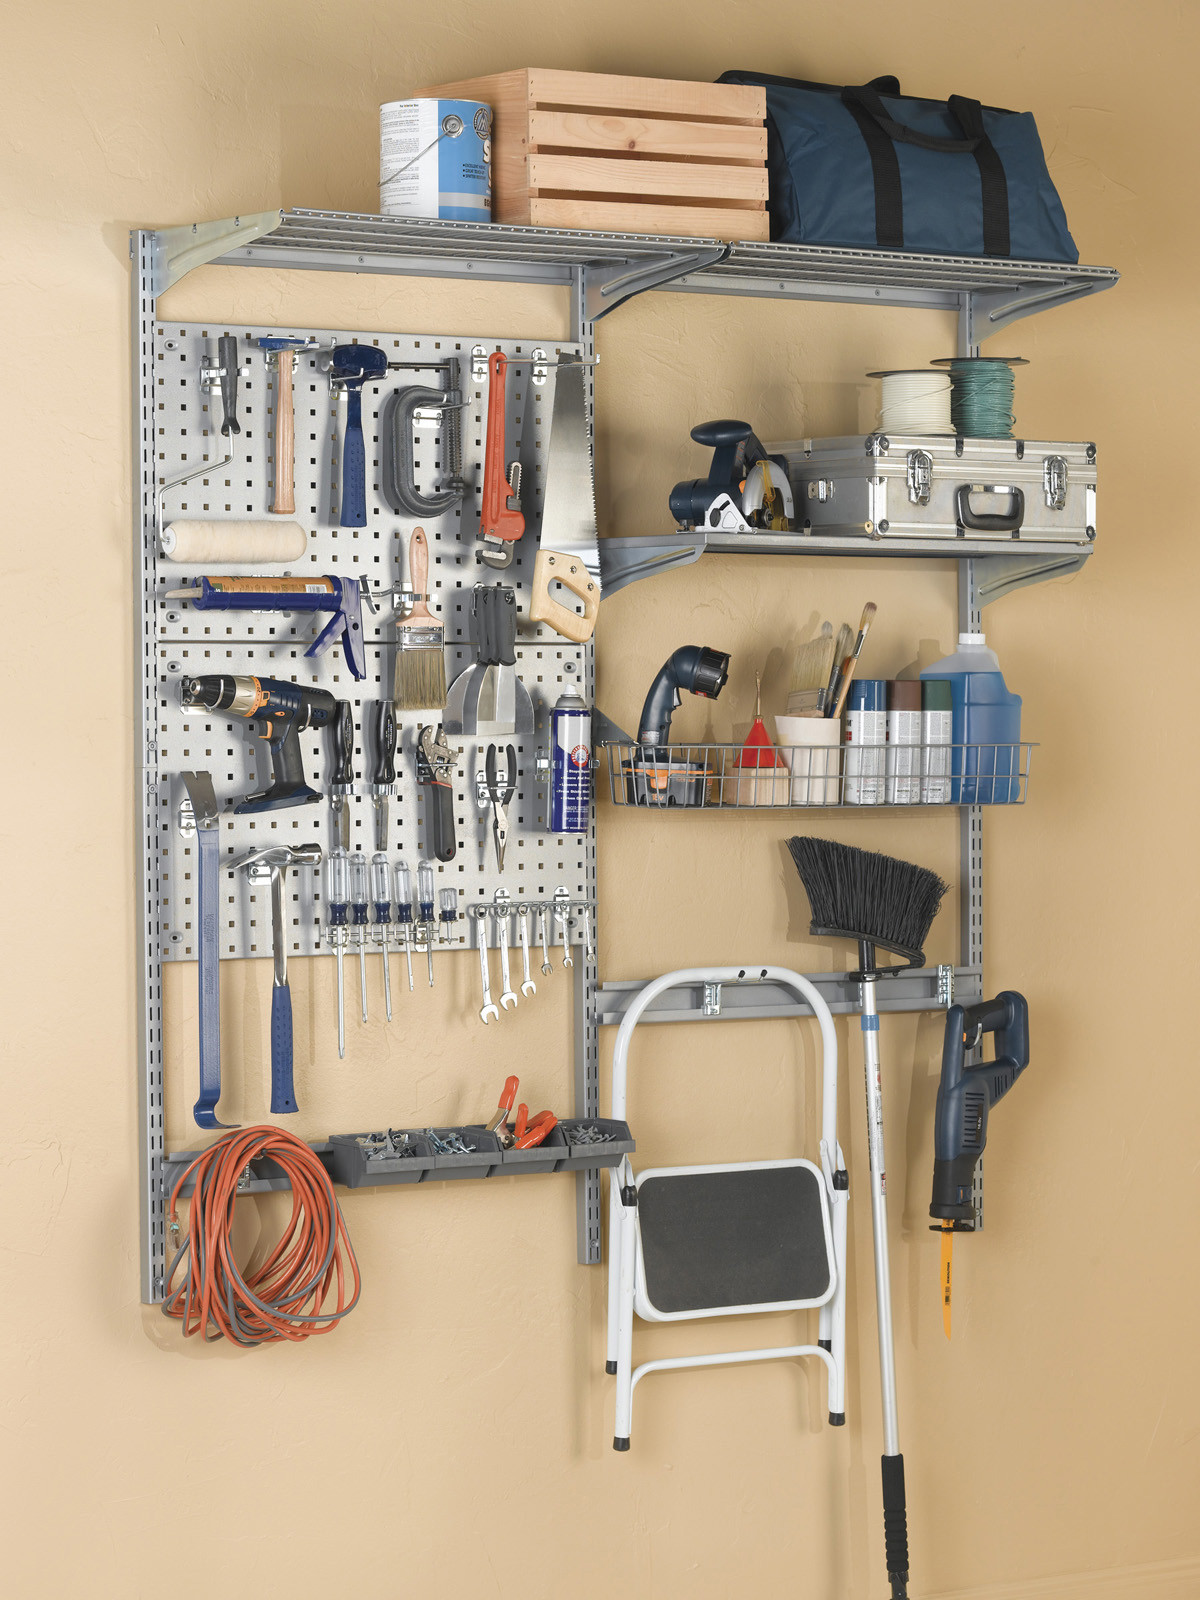 Garage Wall Organizers System
 Garage Wall Systems to Keep Tools Organized